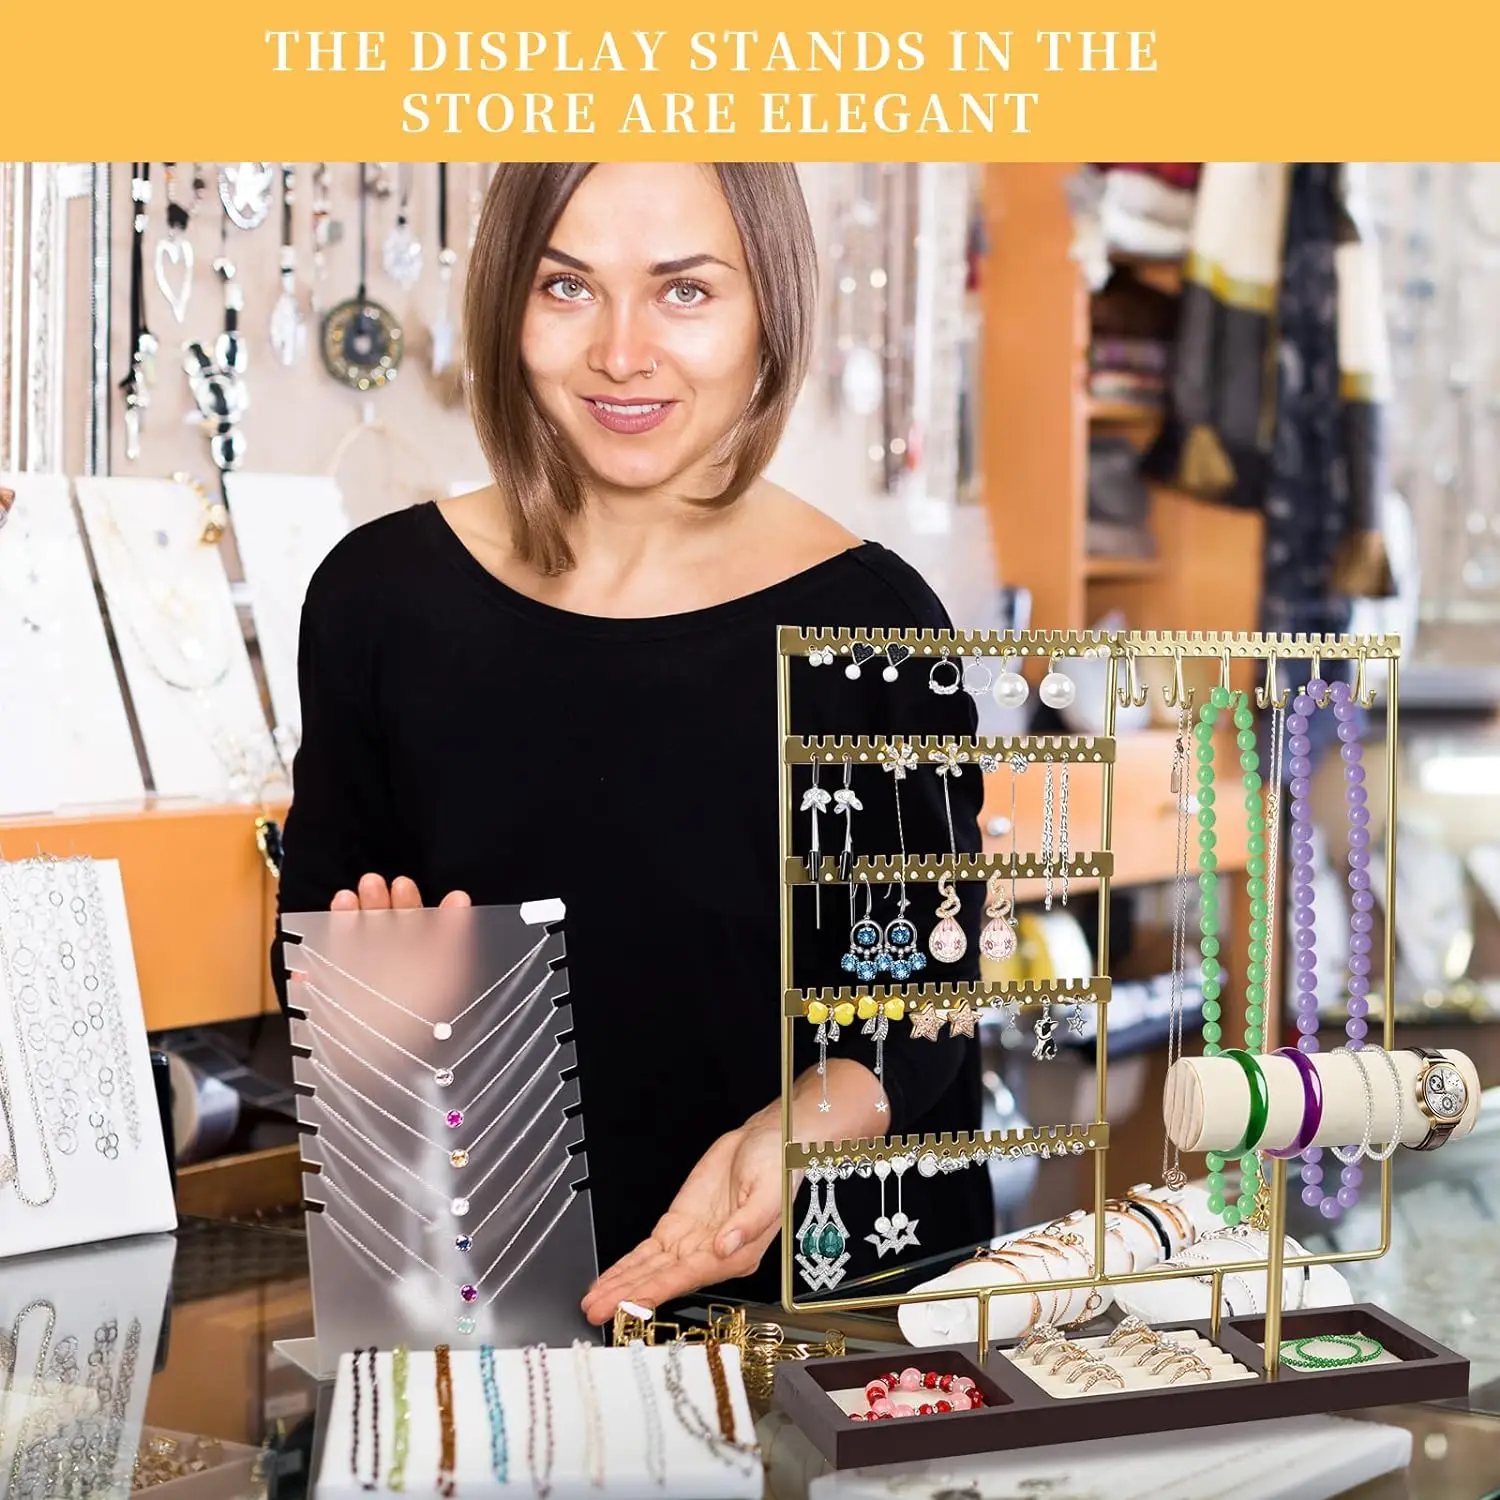 Jewelry Organizer Stand, Earring Holder Organizer with 108 Holes, Jewelry  Stand with Bracelet Holder, Jewelry Holder that Can Store Necklaces Rings